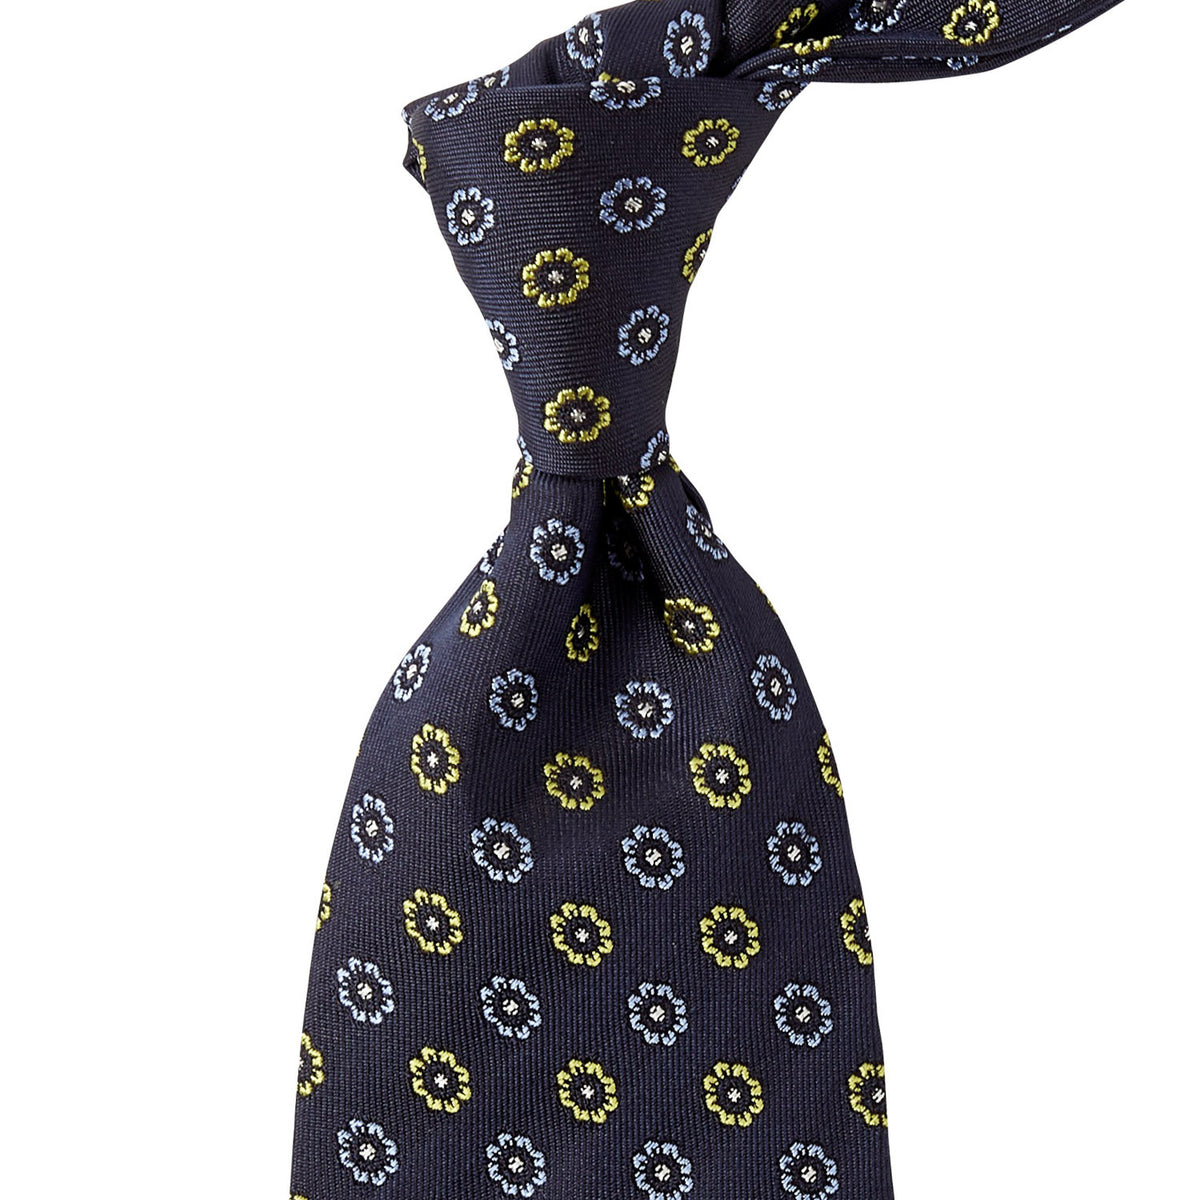 A Sovereign Grade Navy Blue and Lime Jacquard Tie from KirbyAllison.com, of exceptional quality.